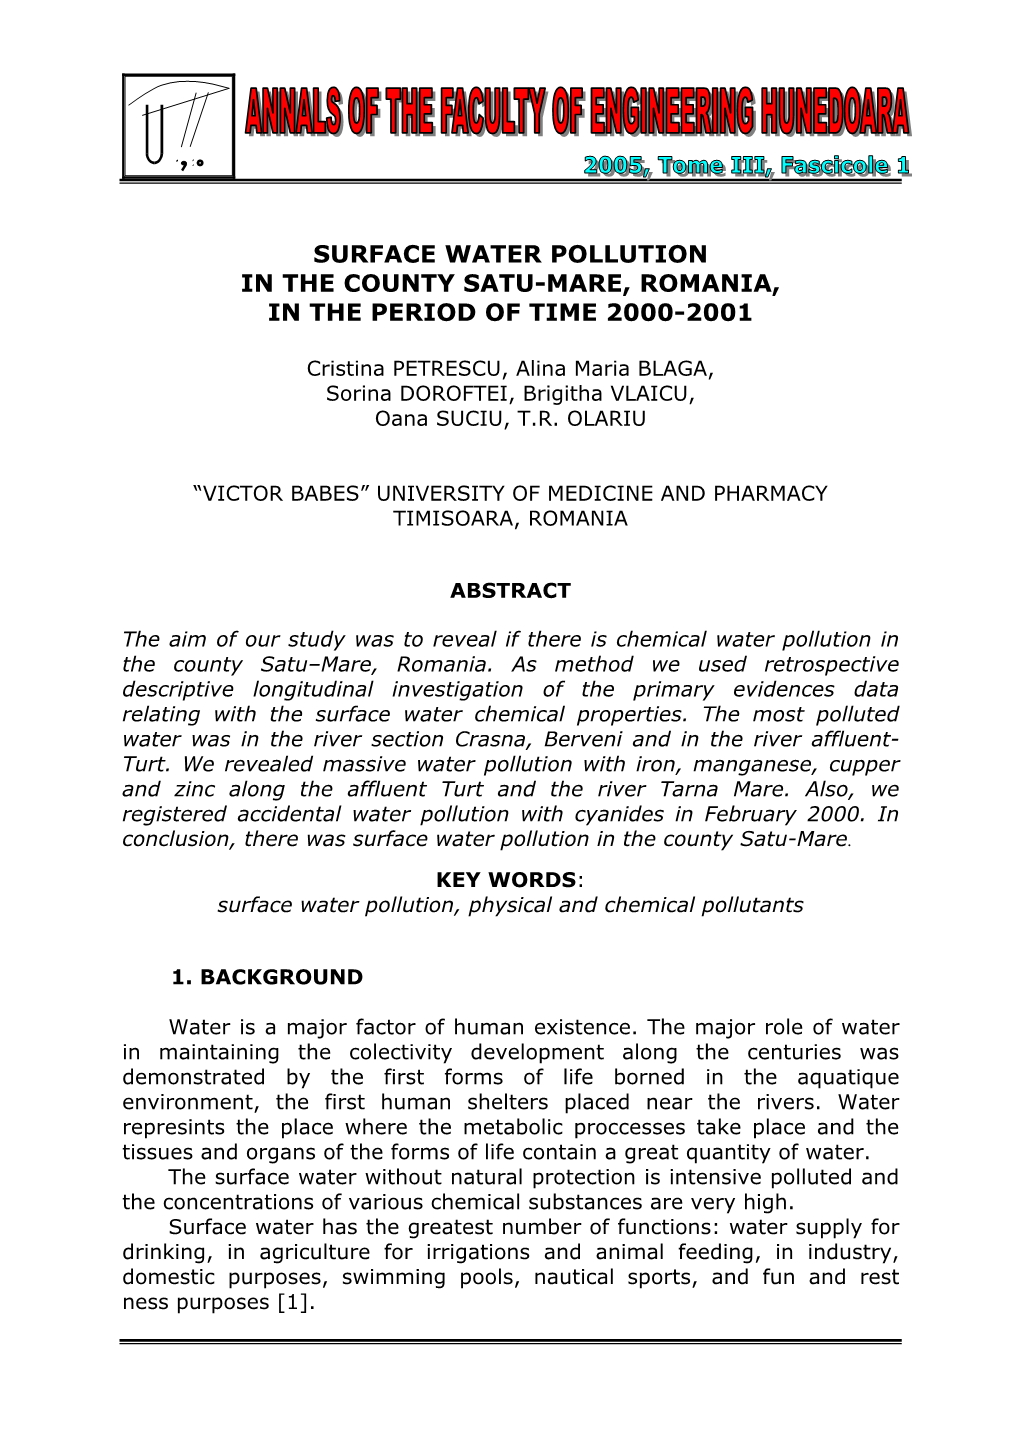 Surface Water Pollution in the County Satu-Mare, Romania, in the Period of Time 2000-2001